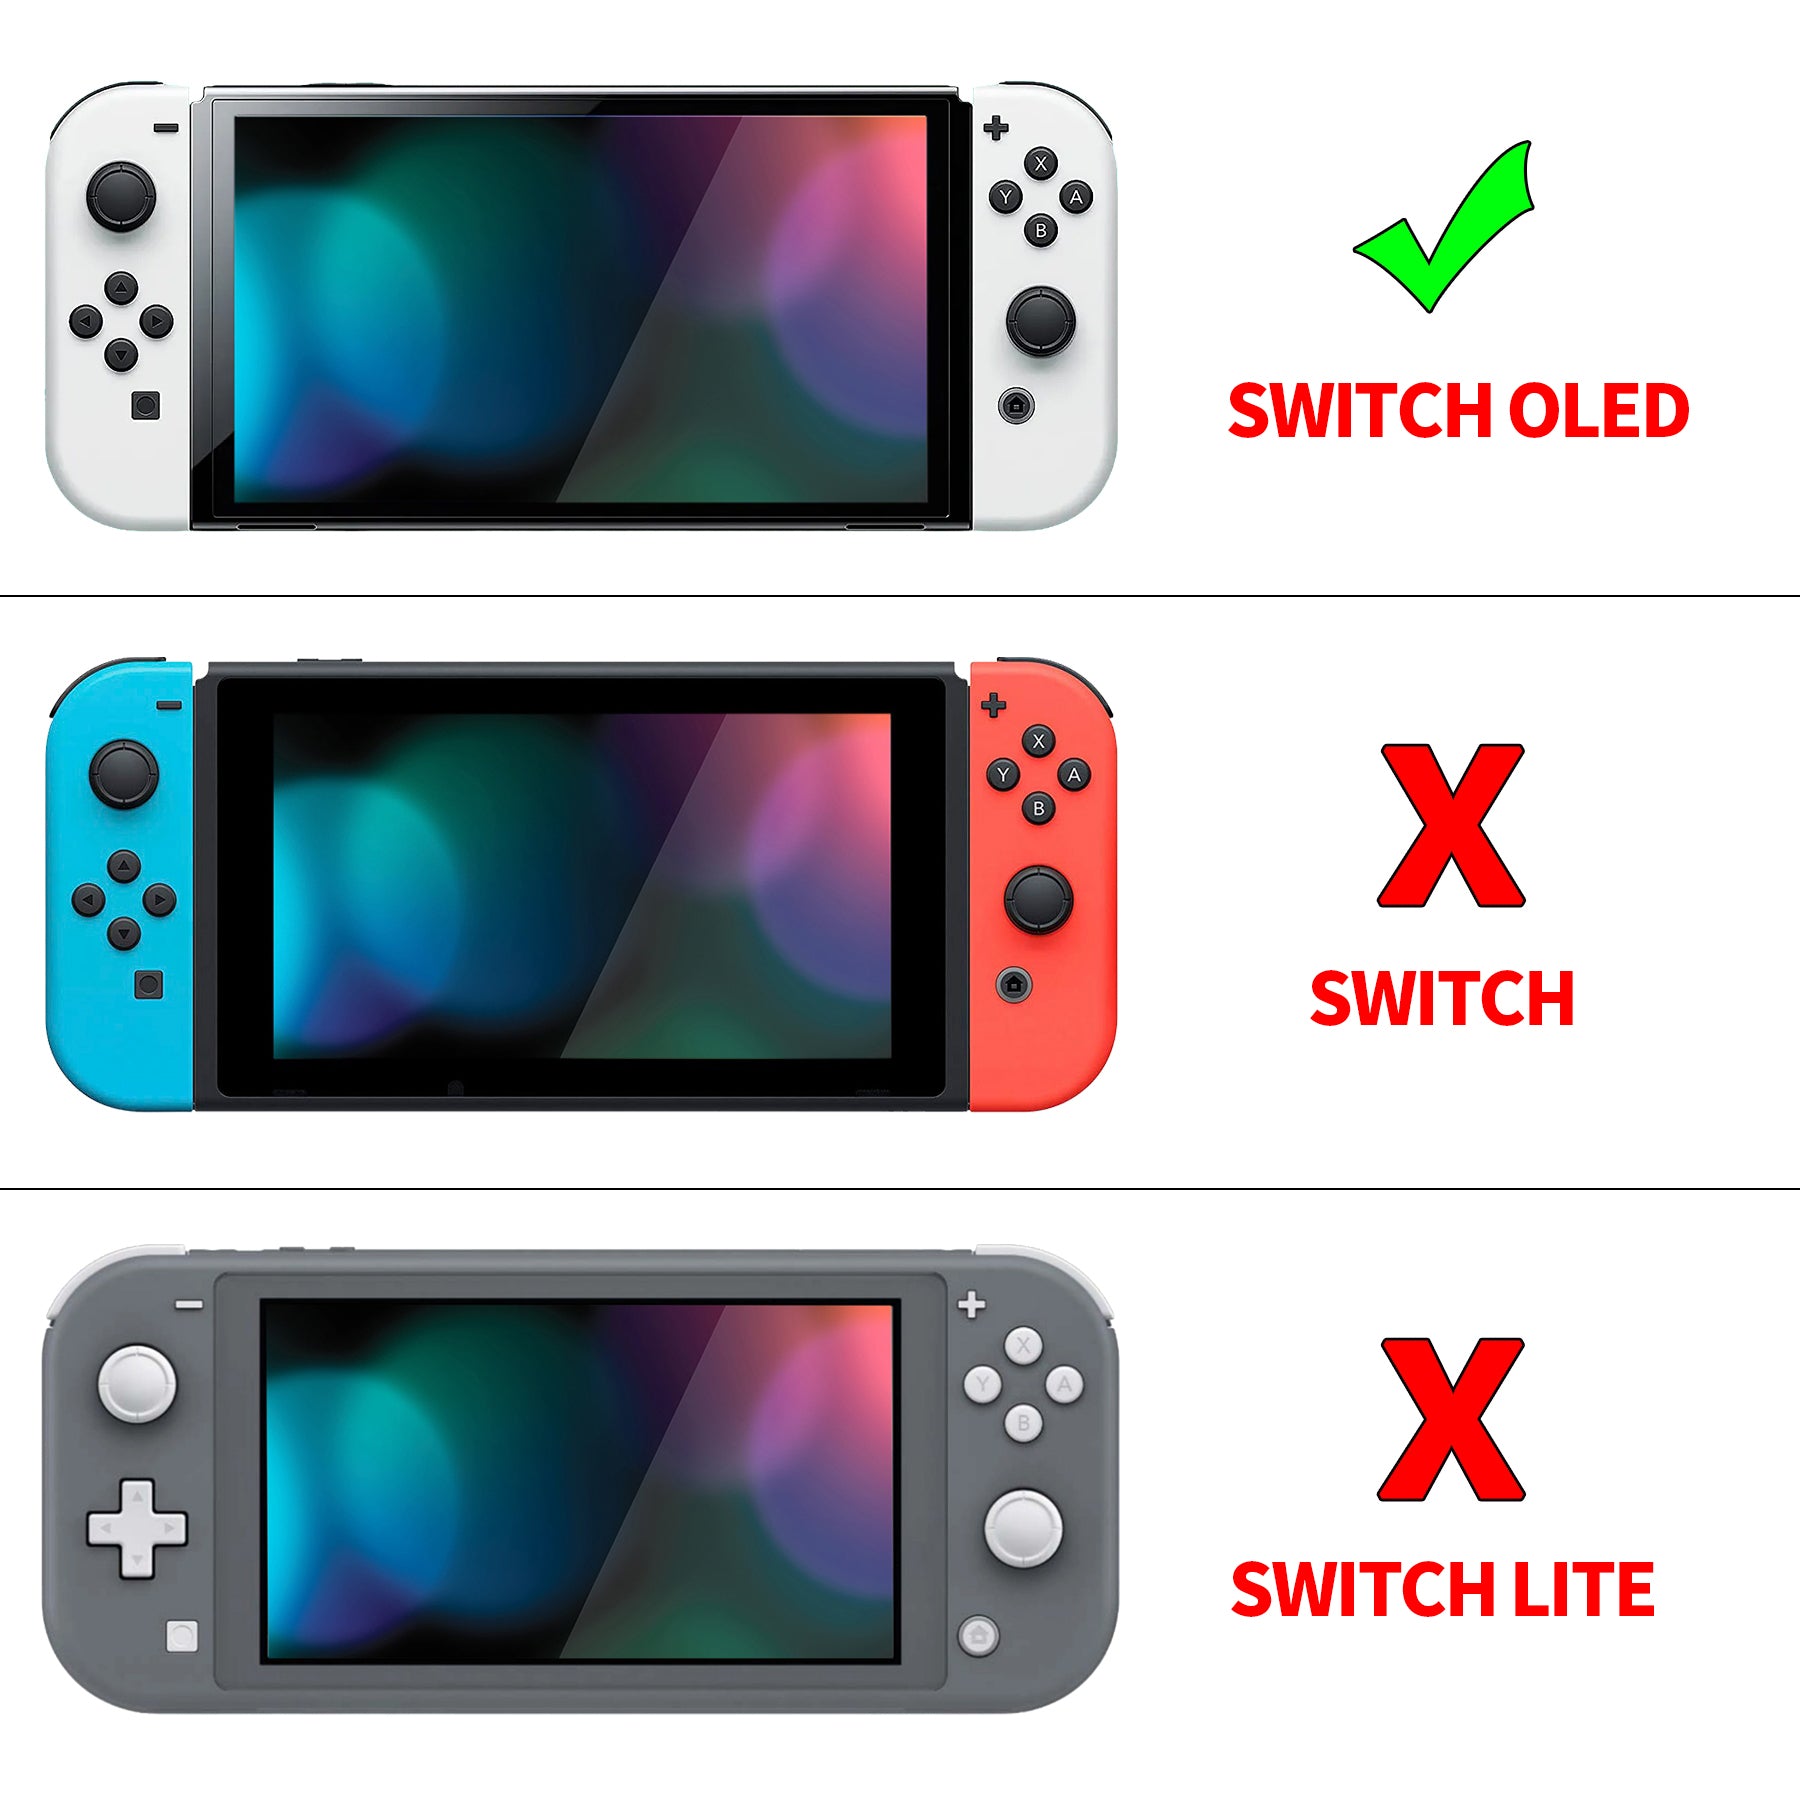 PlayVital ZealProtect Soft Protective Case for Switch OLED, Flexible Protector Joycon Grip Cover for Switch OLED with Thumb Grip Caps & ABXY Direction Button Caps - Street Art - XSOYV6041 playvital